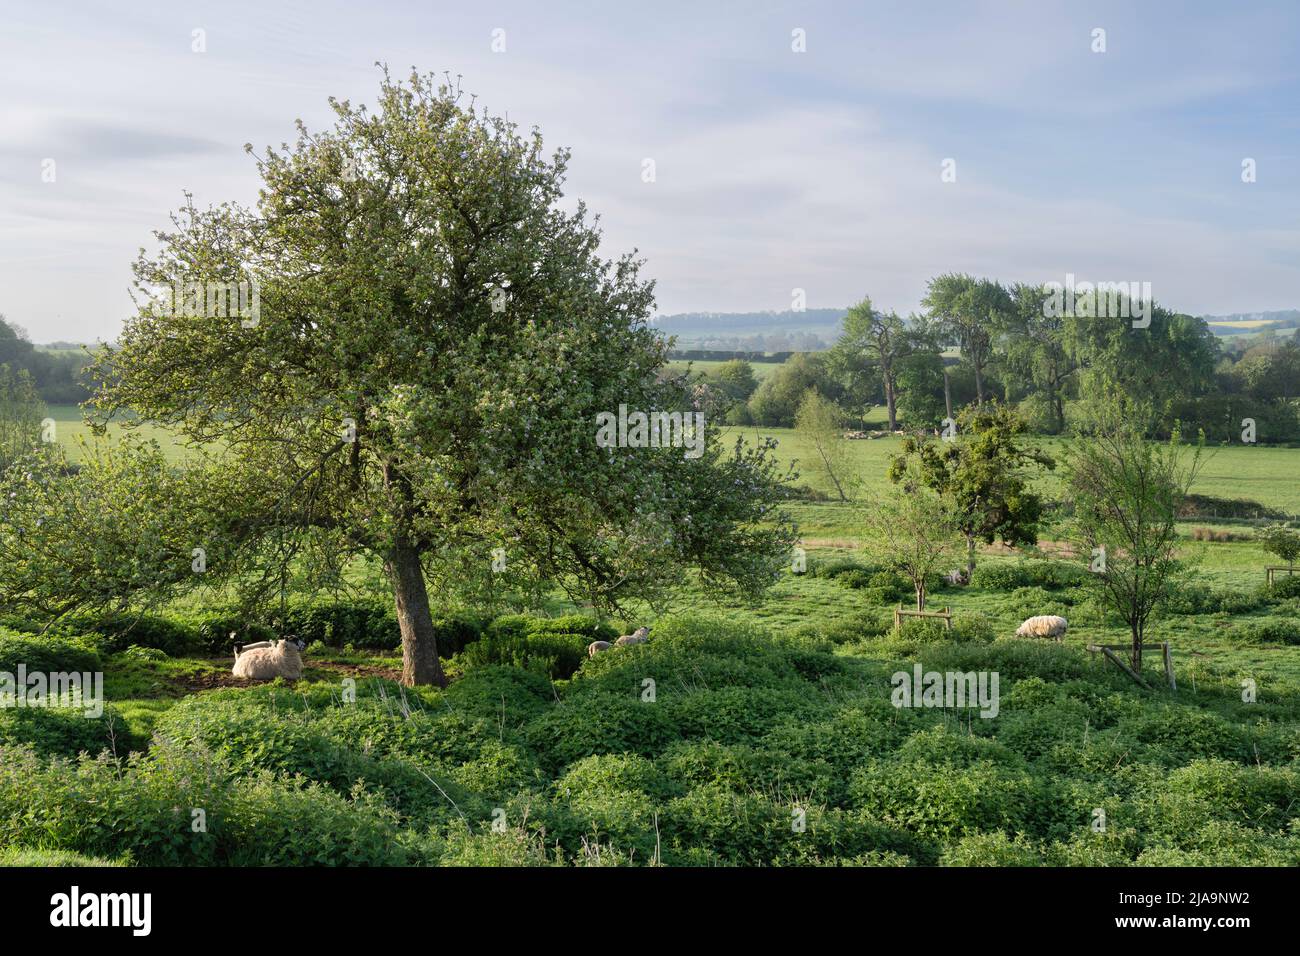 Sheep and apple tree at the Coneygree, Chipping Campden, Cotswolds, England. Stock Photo